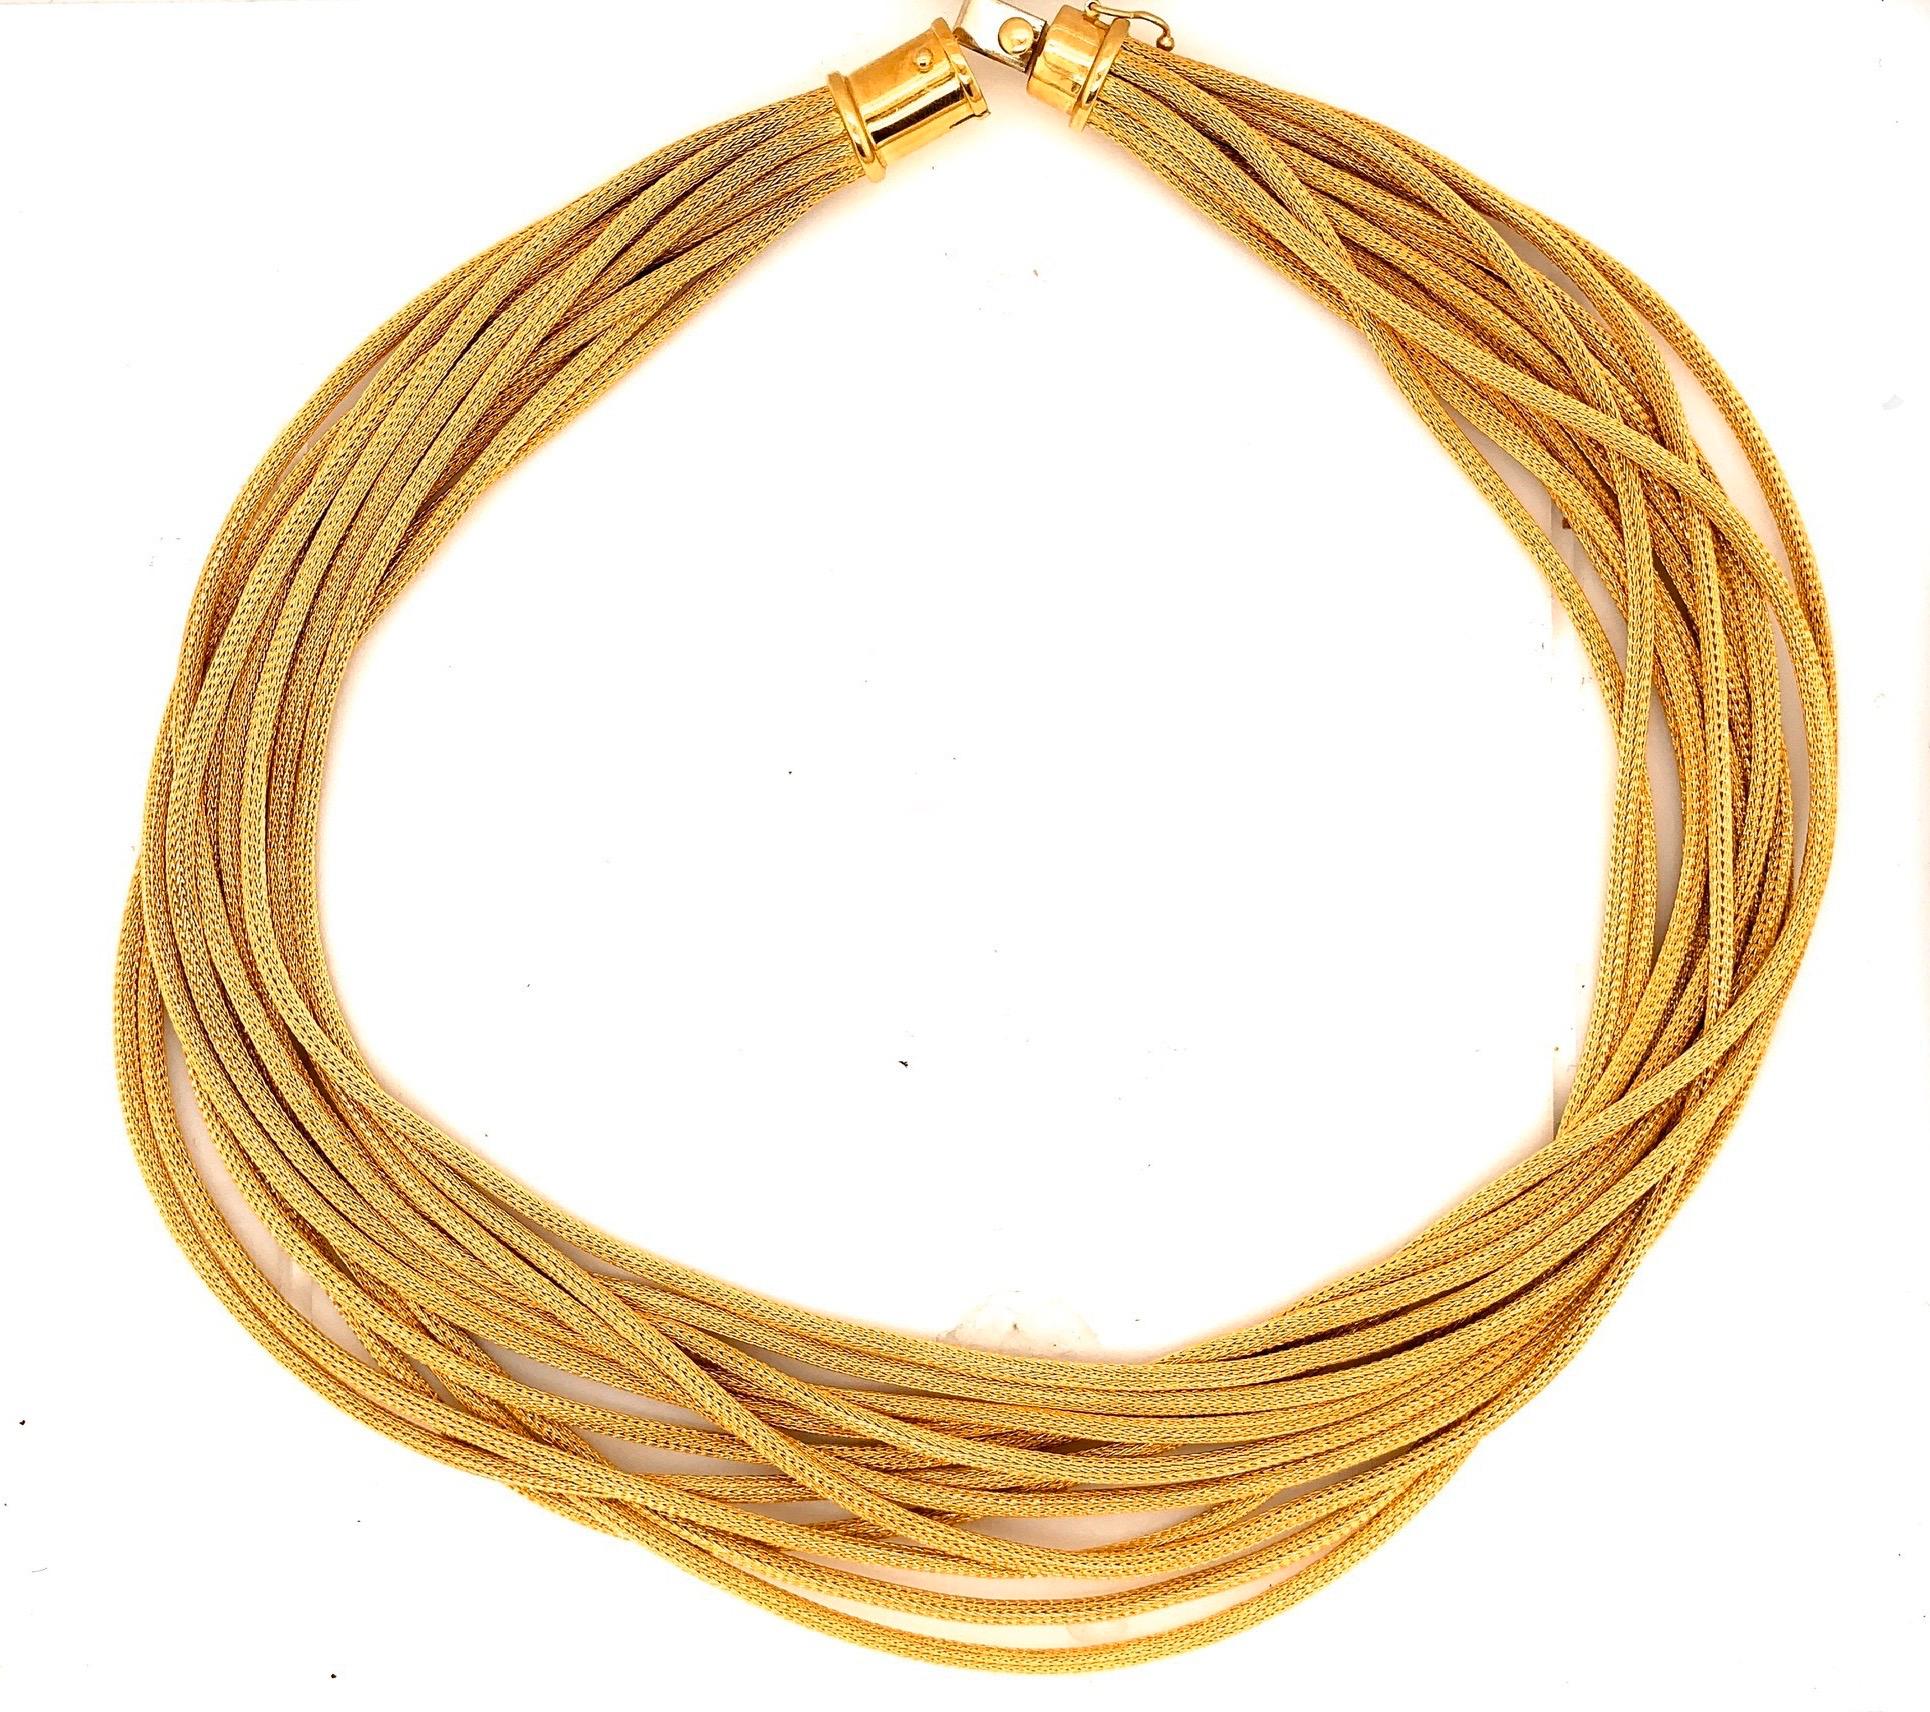 Beautiful Fox tail set of matching necklace bracelet and ring.
The remarkable craftsmanship on this set of jewelry allows for fluid movement throughout the “ropes” lending to its natural appearance. The intricate “foxtail” wiring was crafted using